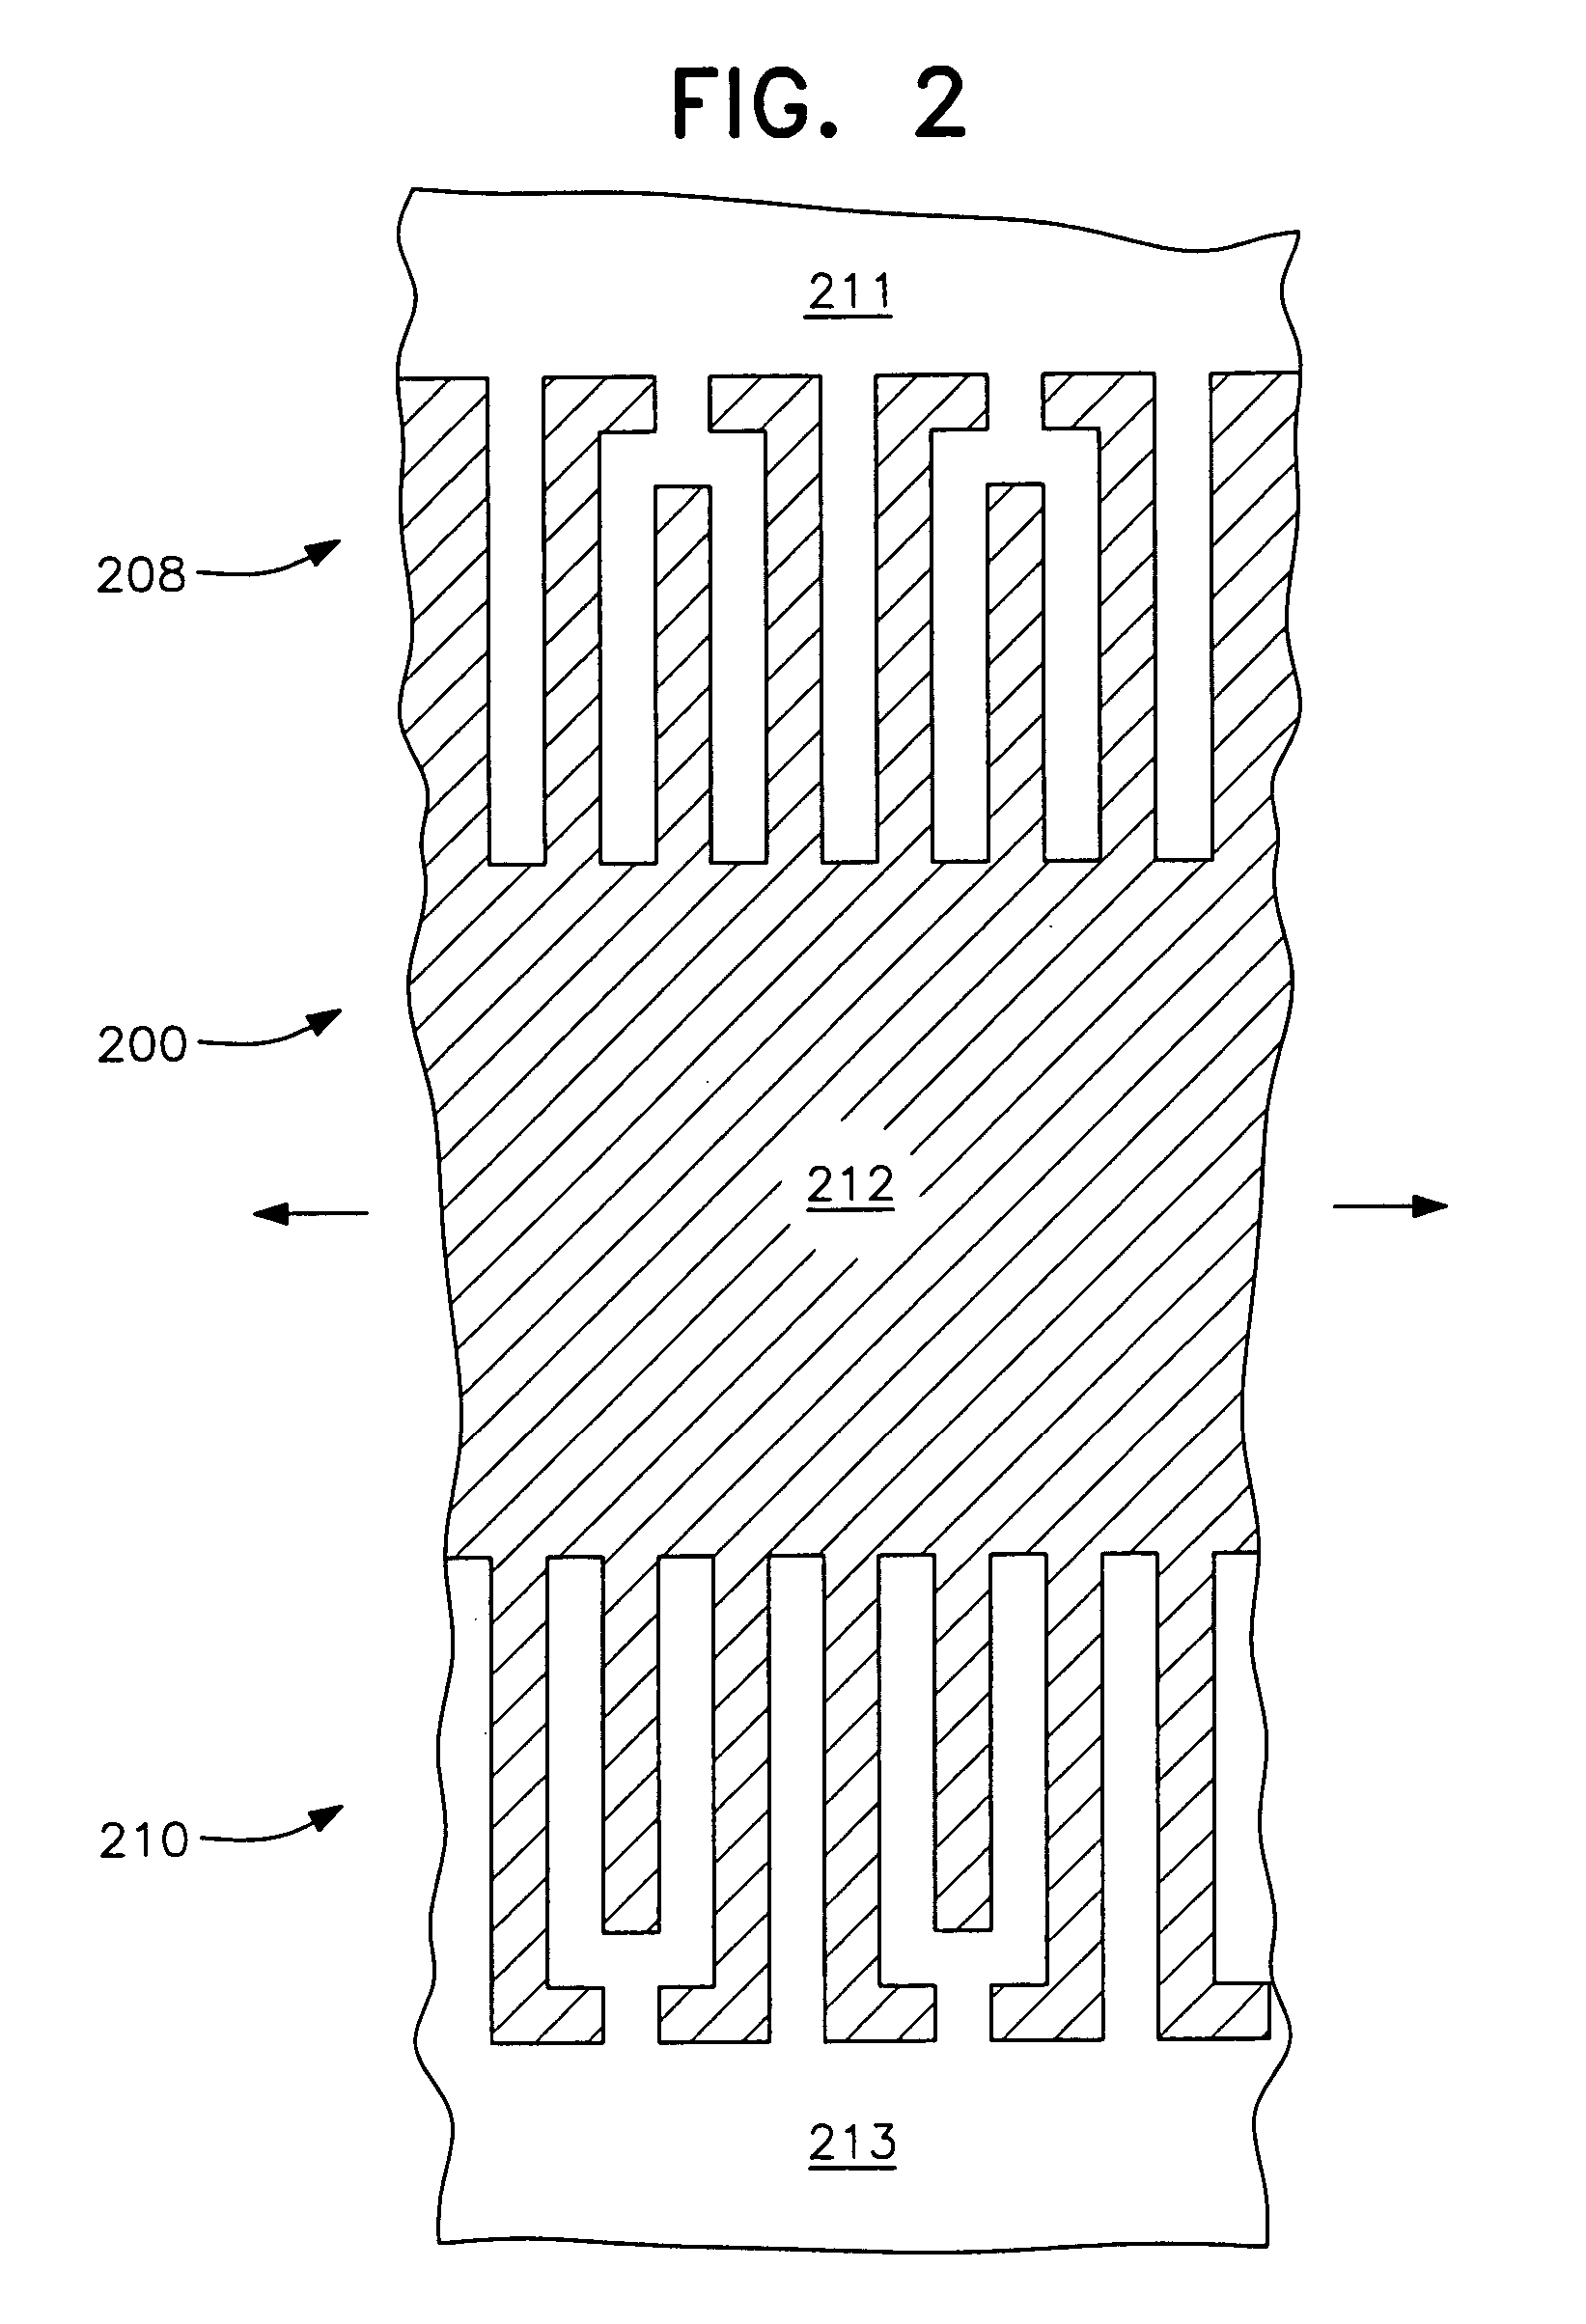 Flexible microwave cooking pouch containing a raw frozen protein portion and method of making